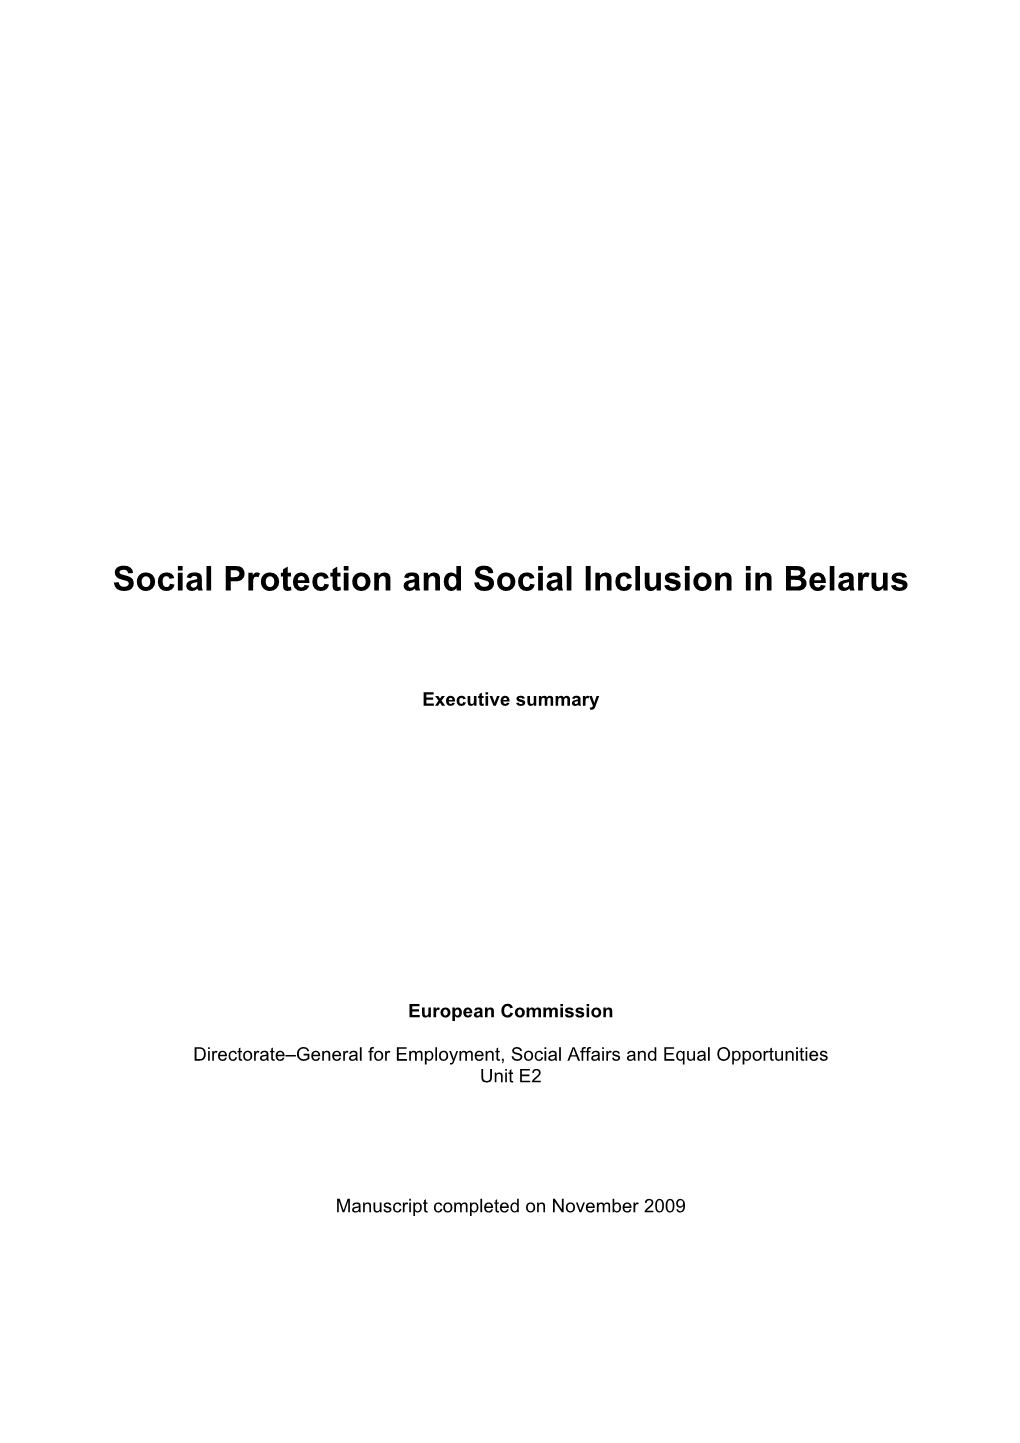 Social Protection and Social Inclusion in Belarus